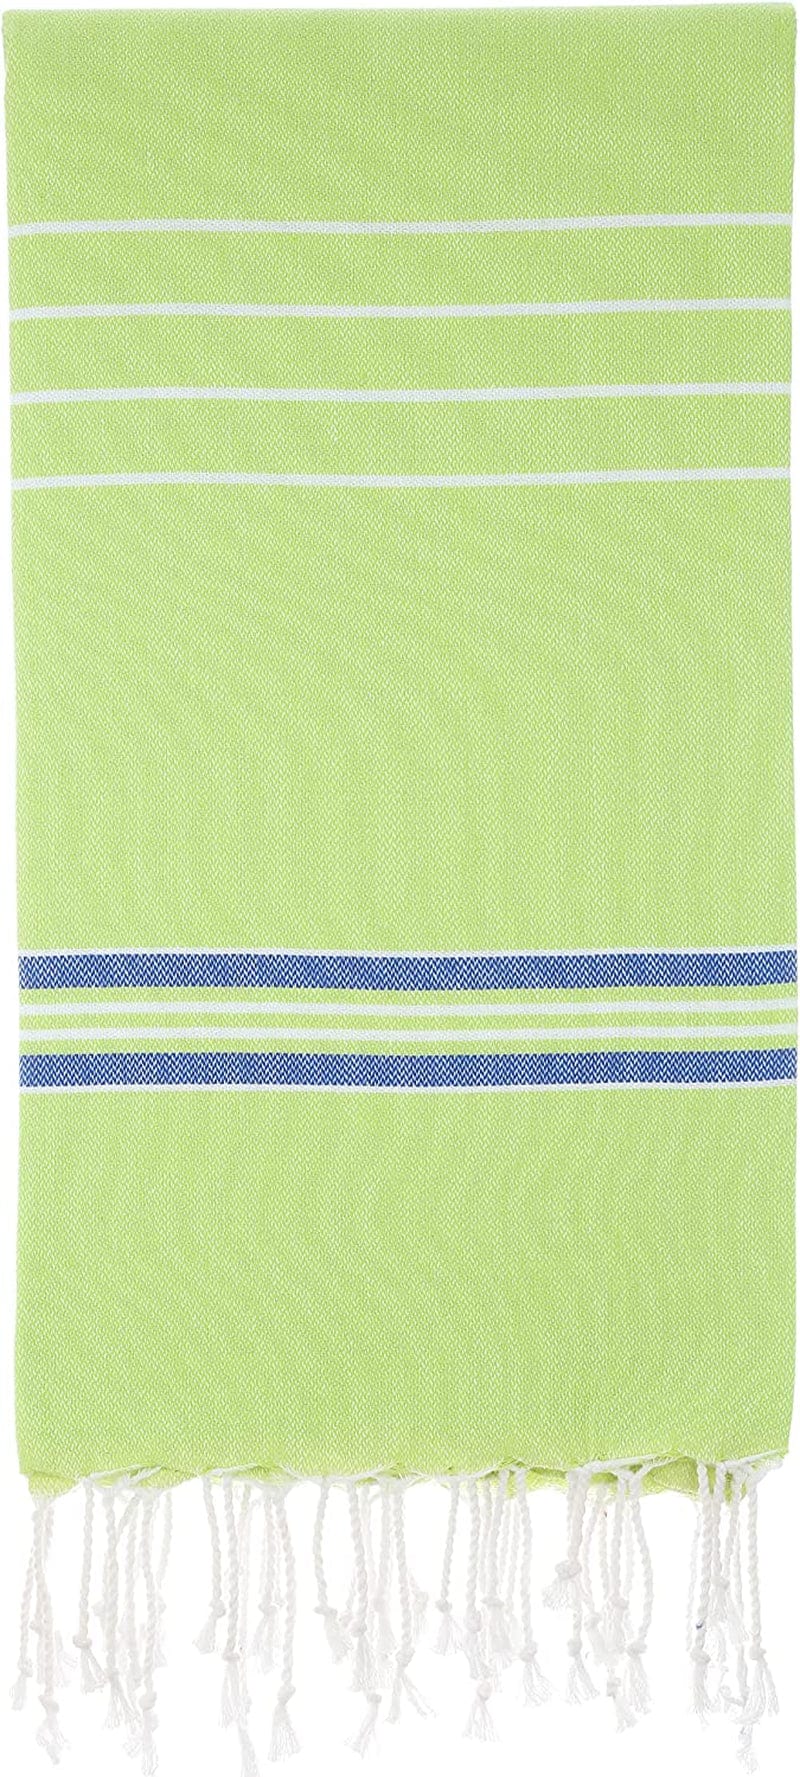 Cacala Turkish Beach Towels Quick Dry Prewashed for Soft Feel Extra Large Blanket Peshtemal for Bathroom, Travel, Pool, Swim, Yoga, Face, Hair and Gym Paradise, 37 in X 70 In, Aqua Home & Garden > Linens & Bedding > Towels Cacala Pistachio Royal 37 in x 70 in 